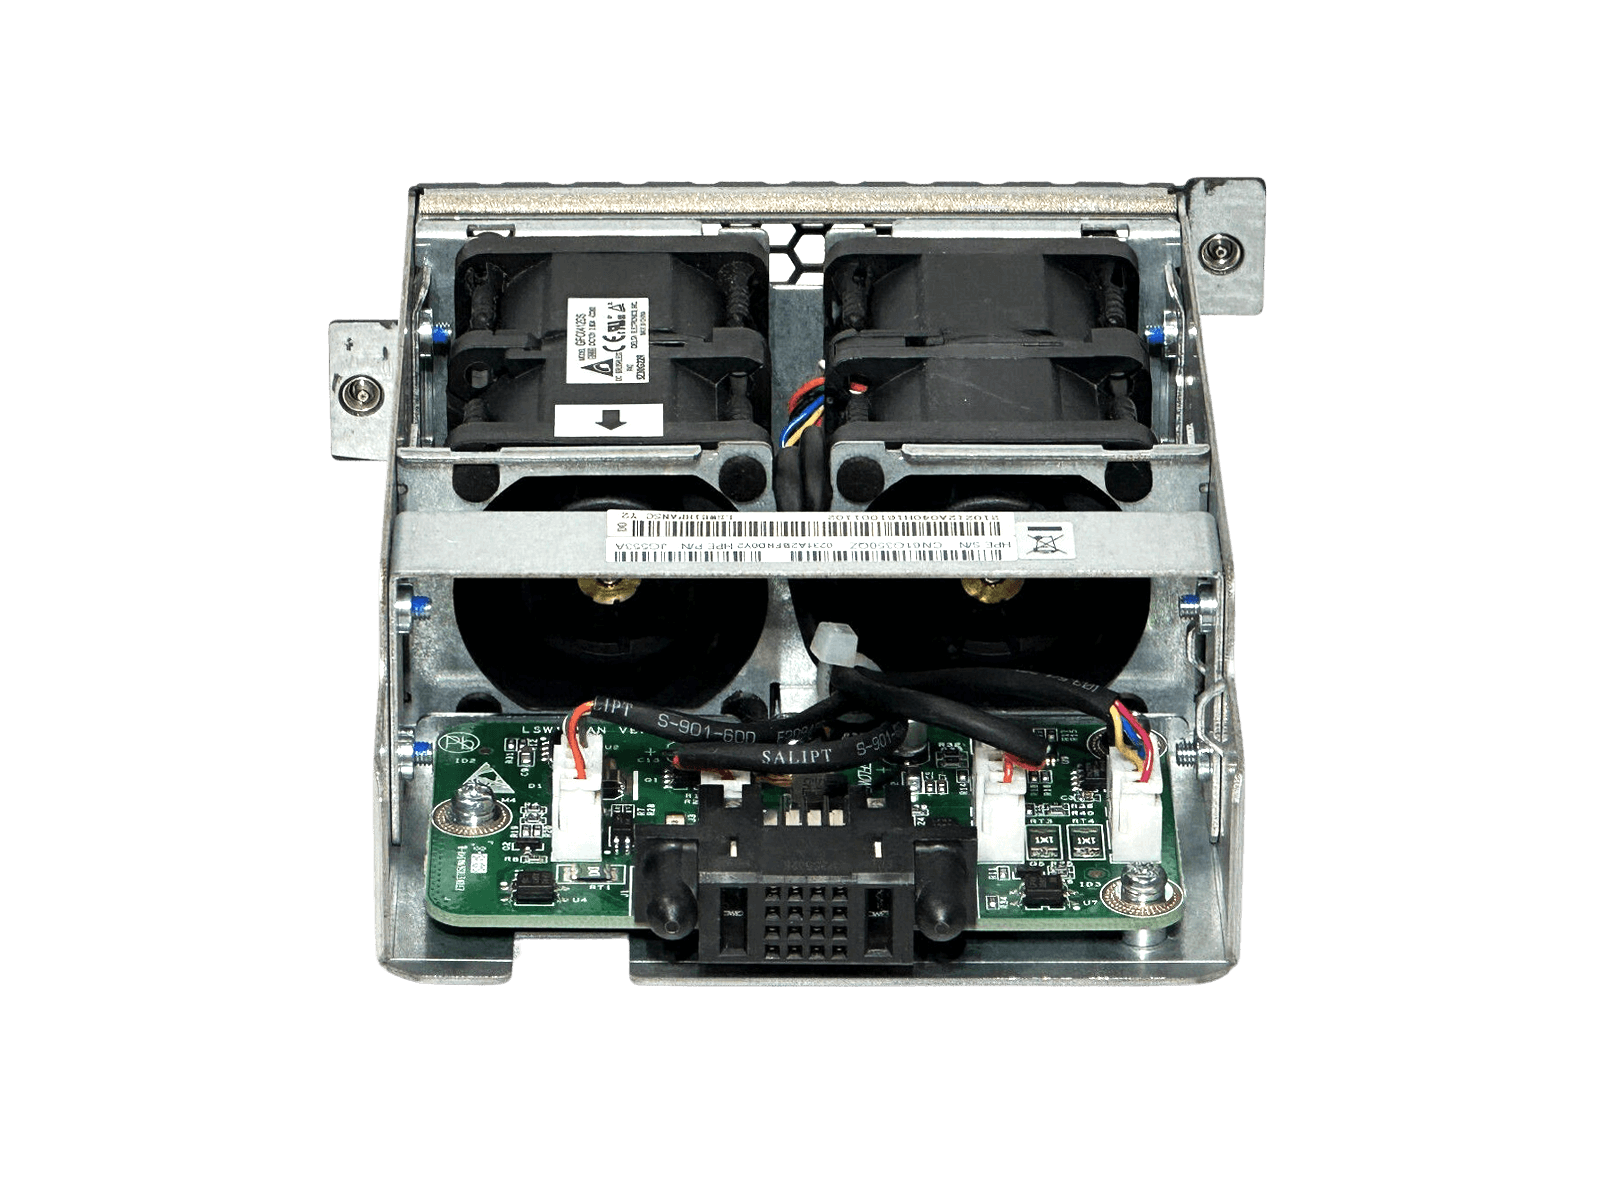 HPE JG553A X712 Back (Power Side) to Front (Port Side) Airflow High Volume Fan Tray.